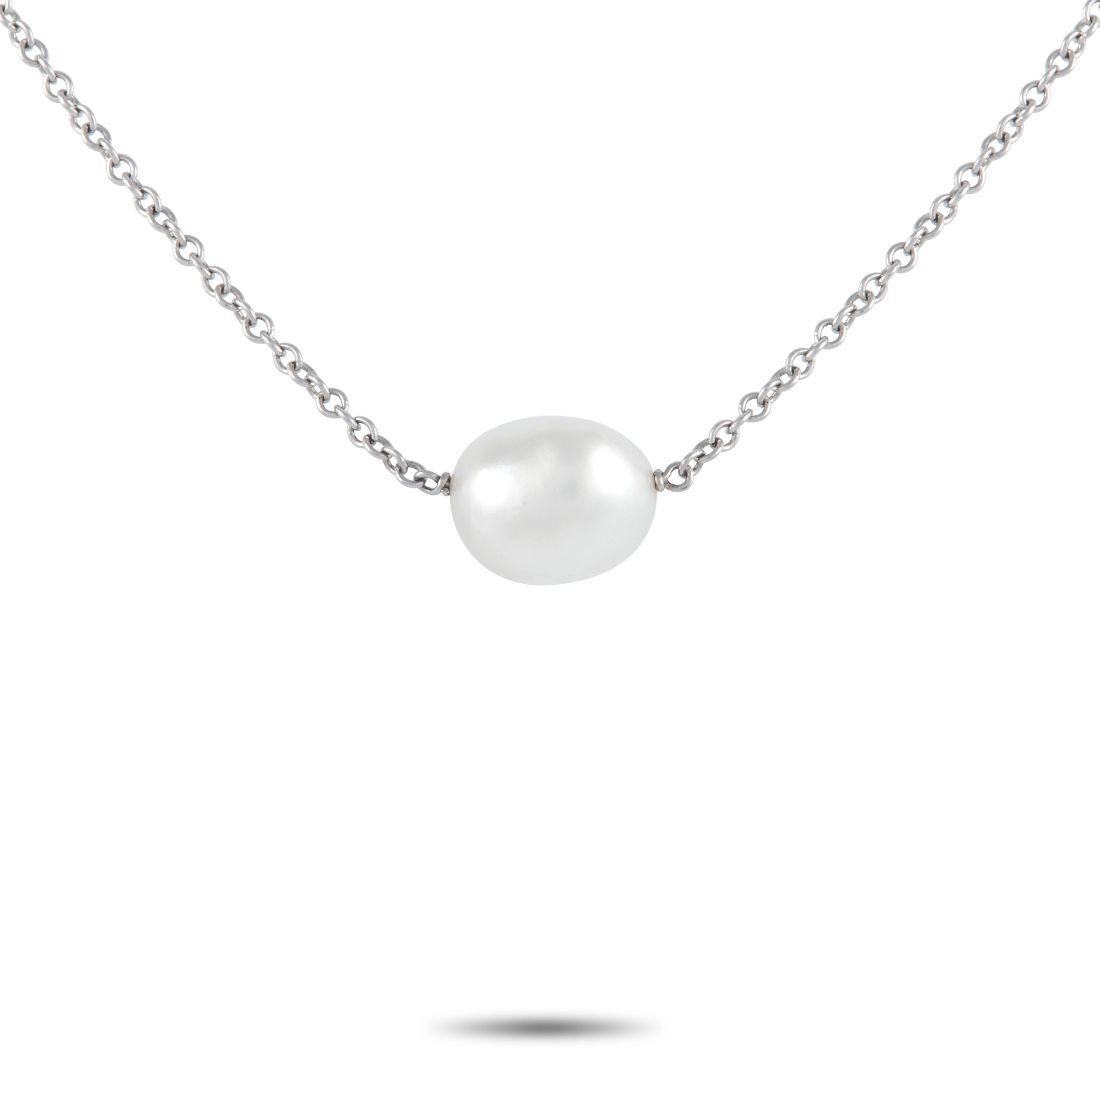 This stunning 36” long Elsa Peretti necklace from Tiffany & Co. is a statement-making accessory that will elevate any ensemble. Made from pure platinum, the dynamic chain is accented by South Sea Keshi Pearls and subtle diamond accents totaling 0.82